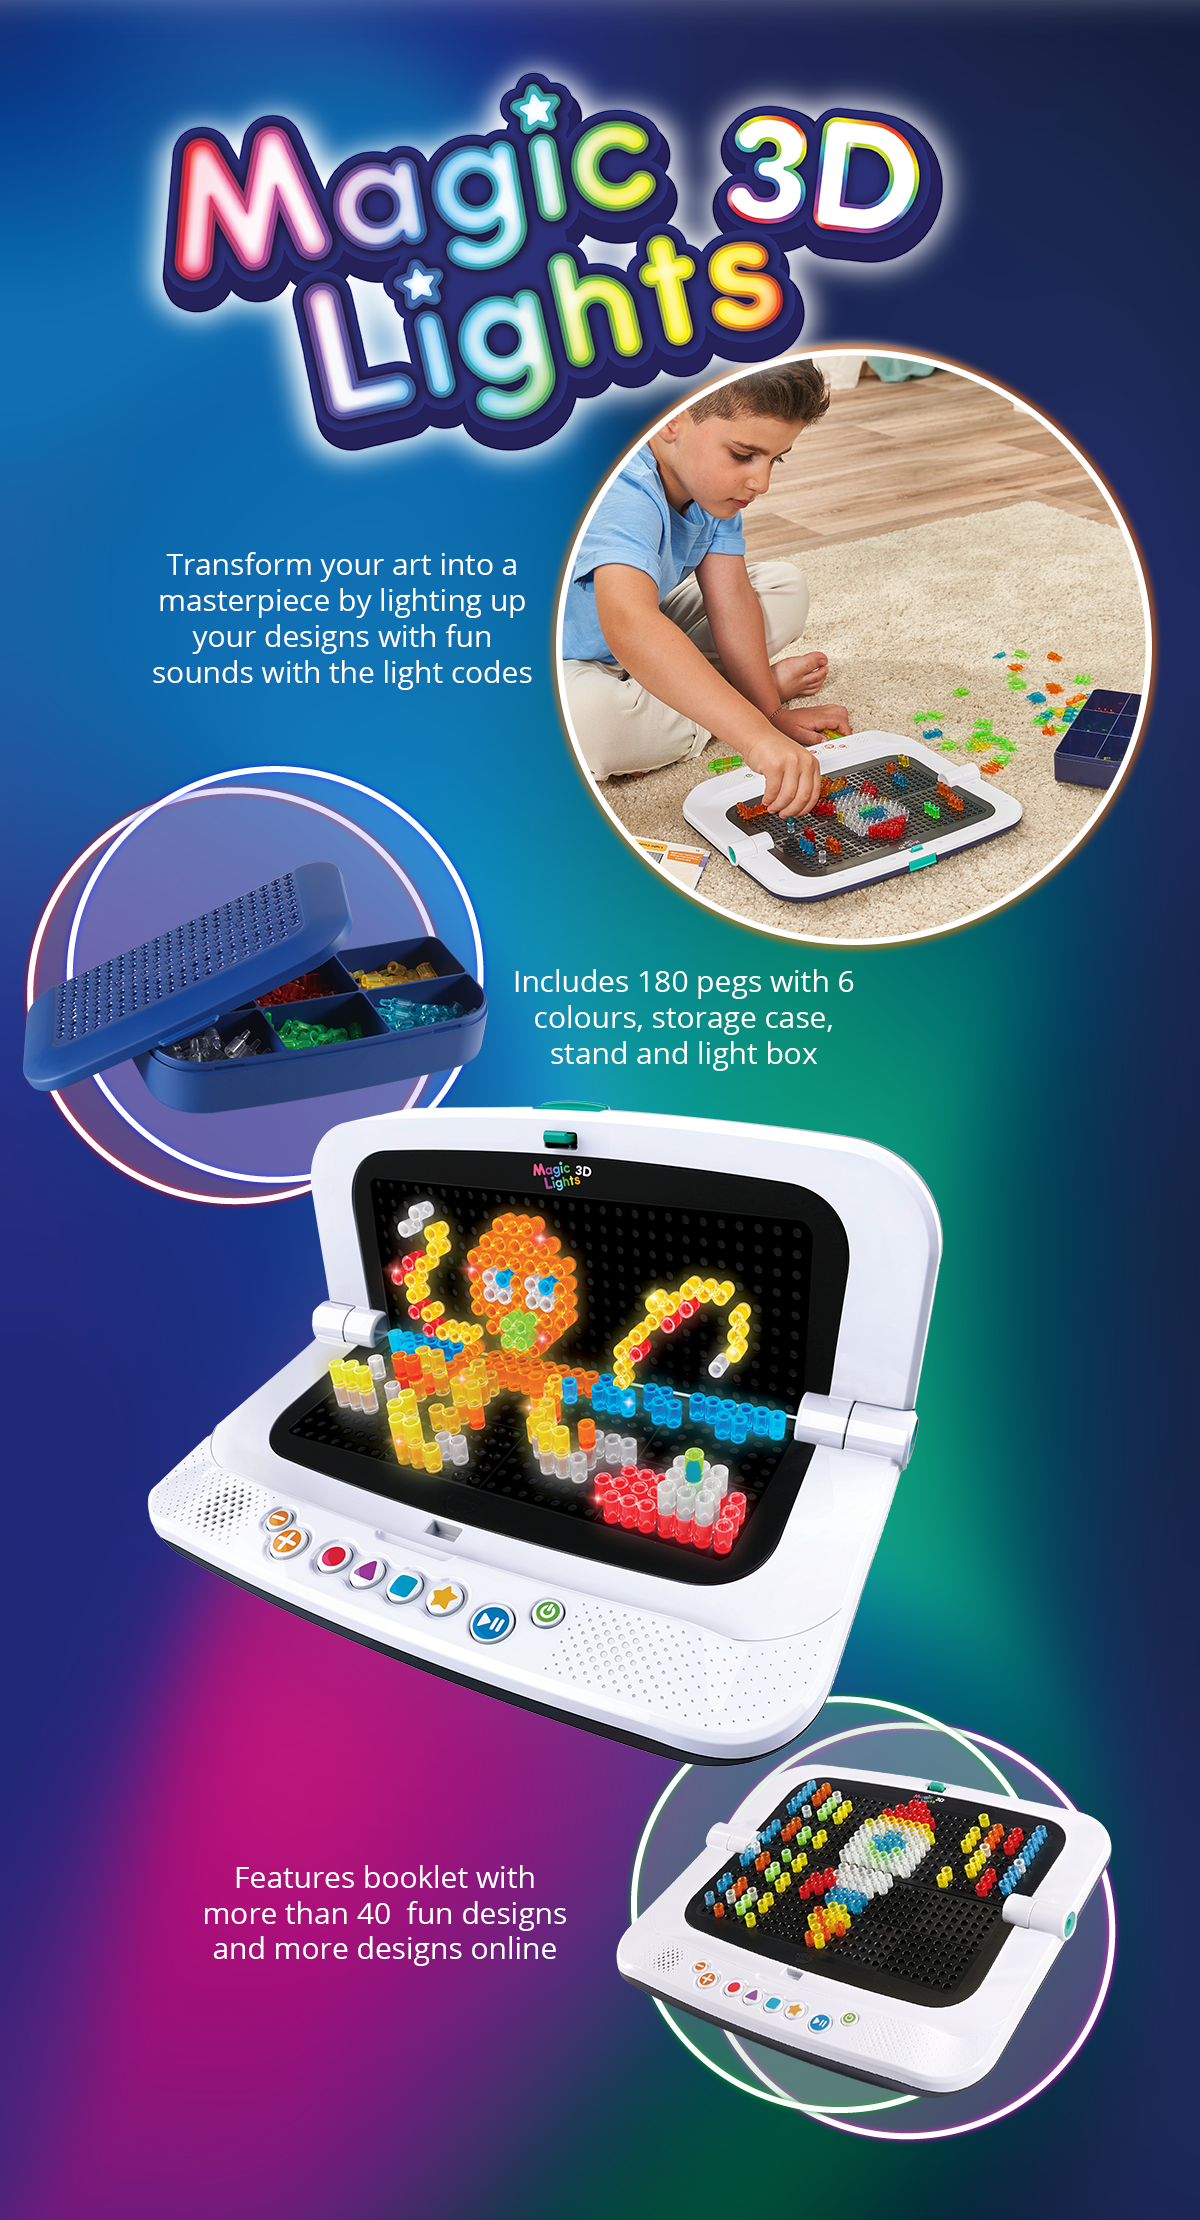 Magic 3D Lights - Transform your art into a masterpiece by lighting up your designs with fun sounds with the light codes, Includes 180 pegs with 6 colours, storage case, stand and light box, Features booklet with more than 40 fun designs and more designs online